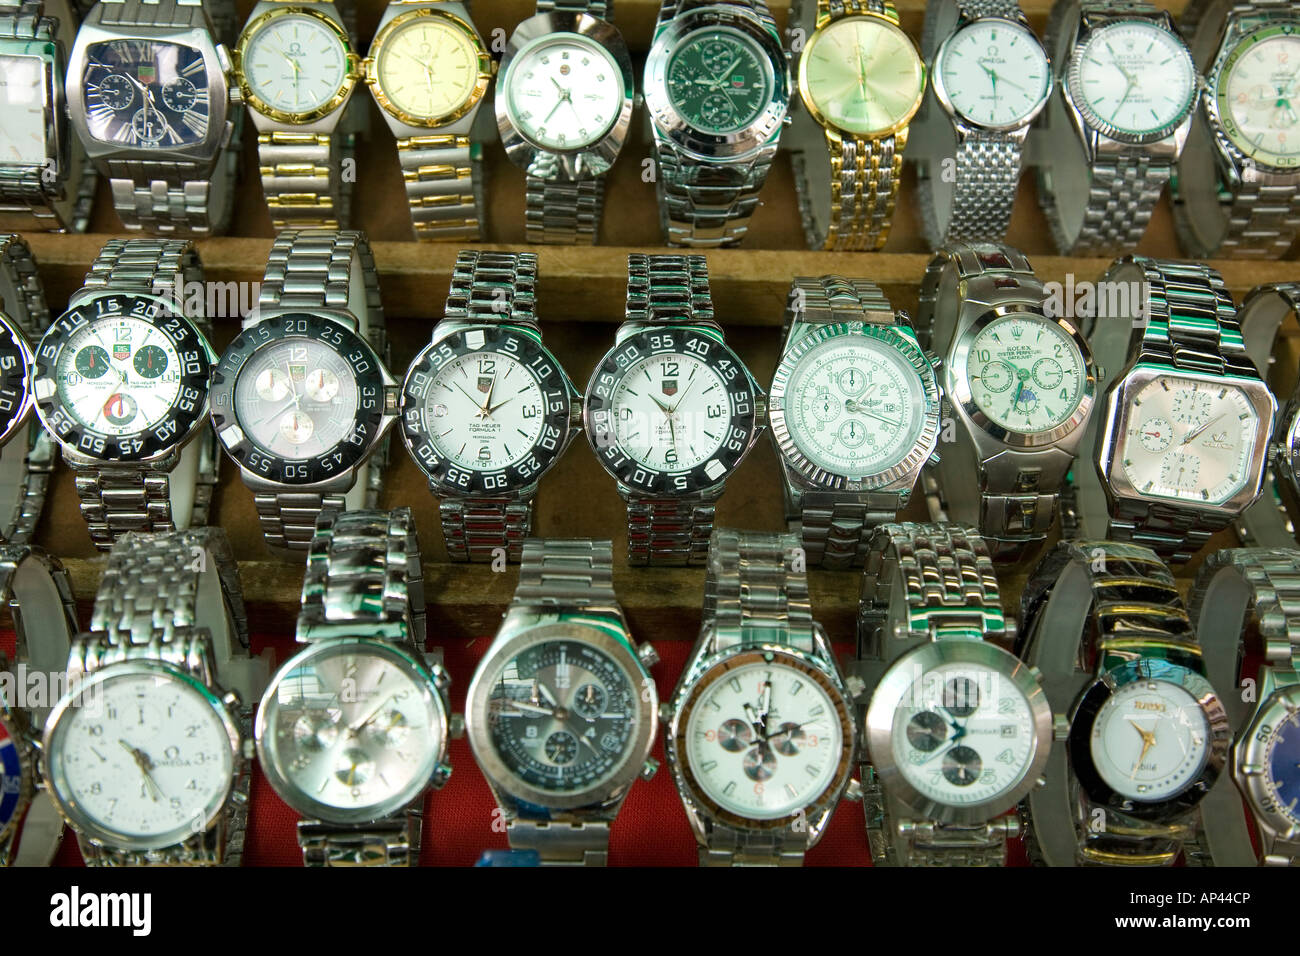 Watches on sale at the Petaling Street 